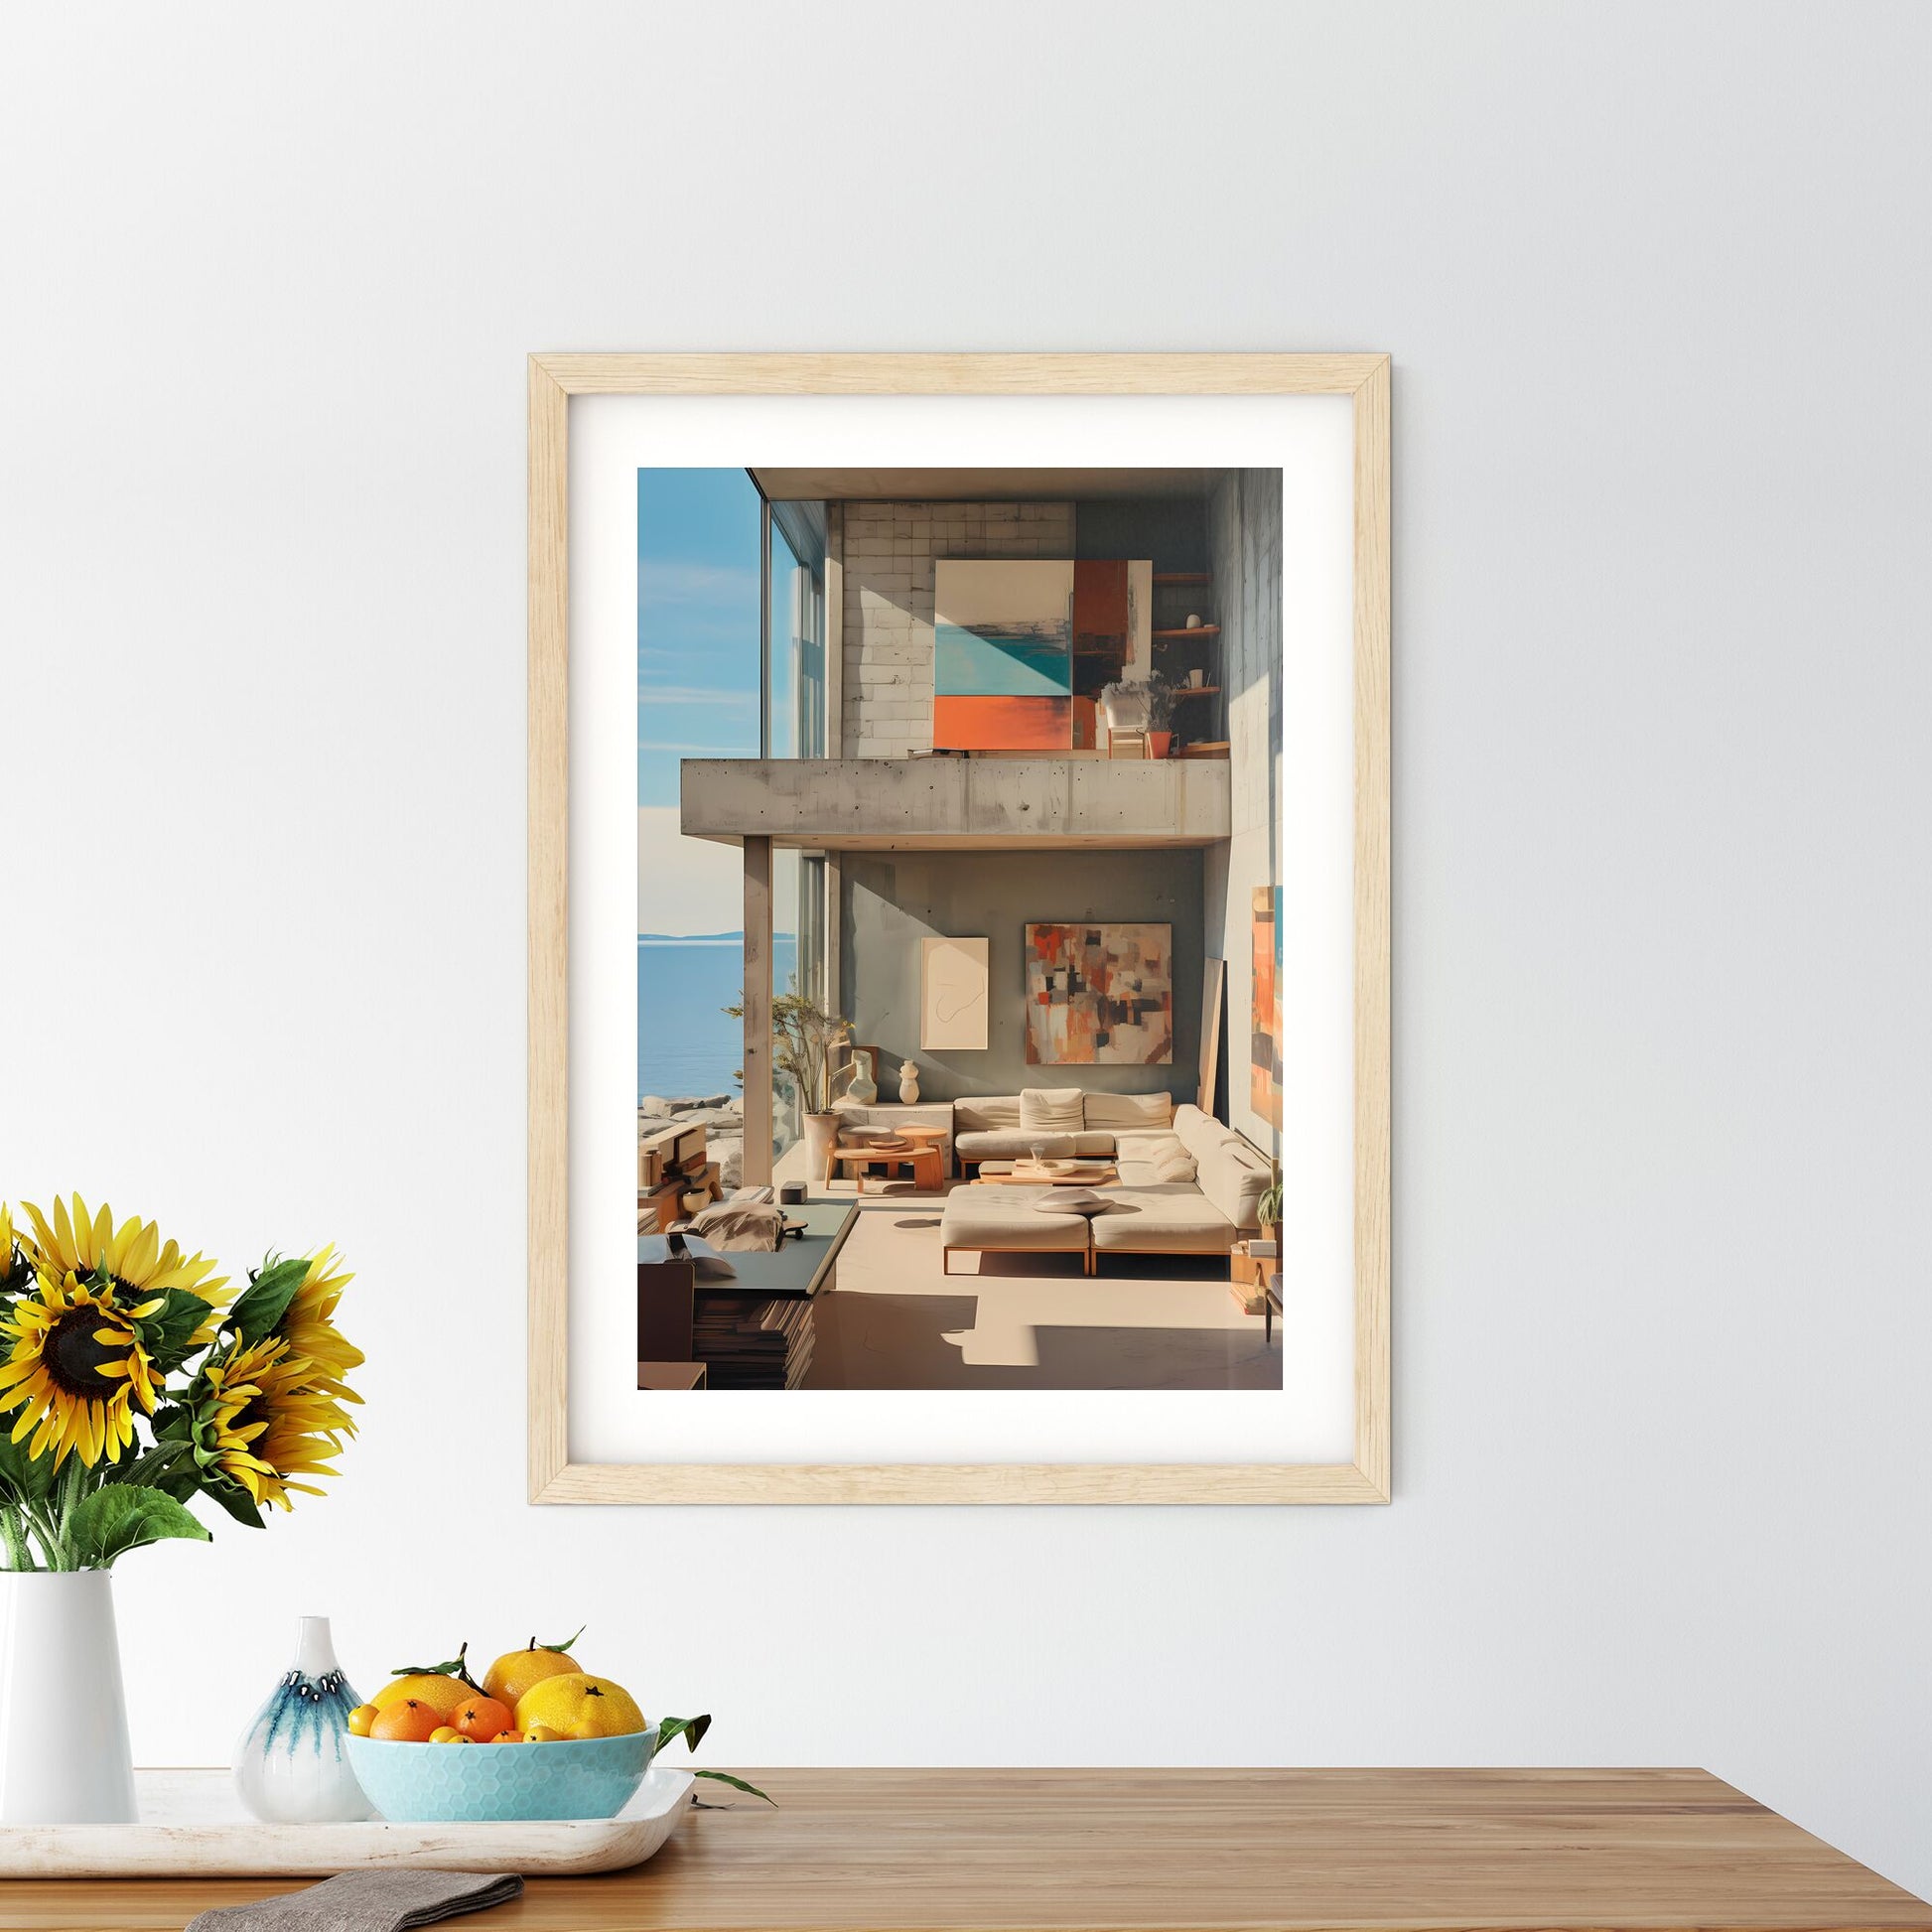 Modernism - A Living Room With A Large Balcony Overlooking The Water Default Title